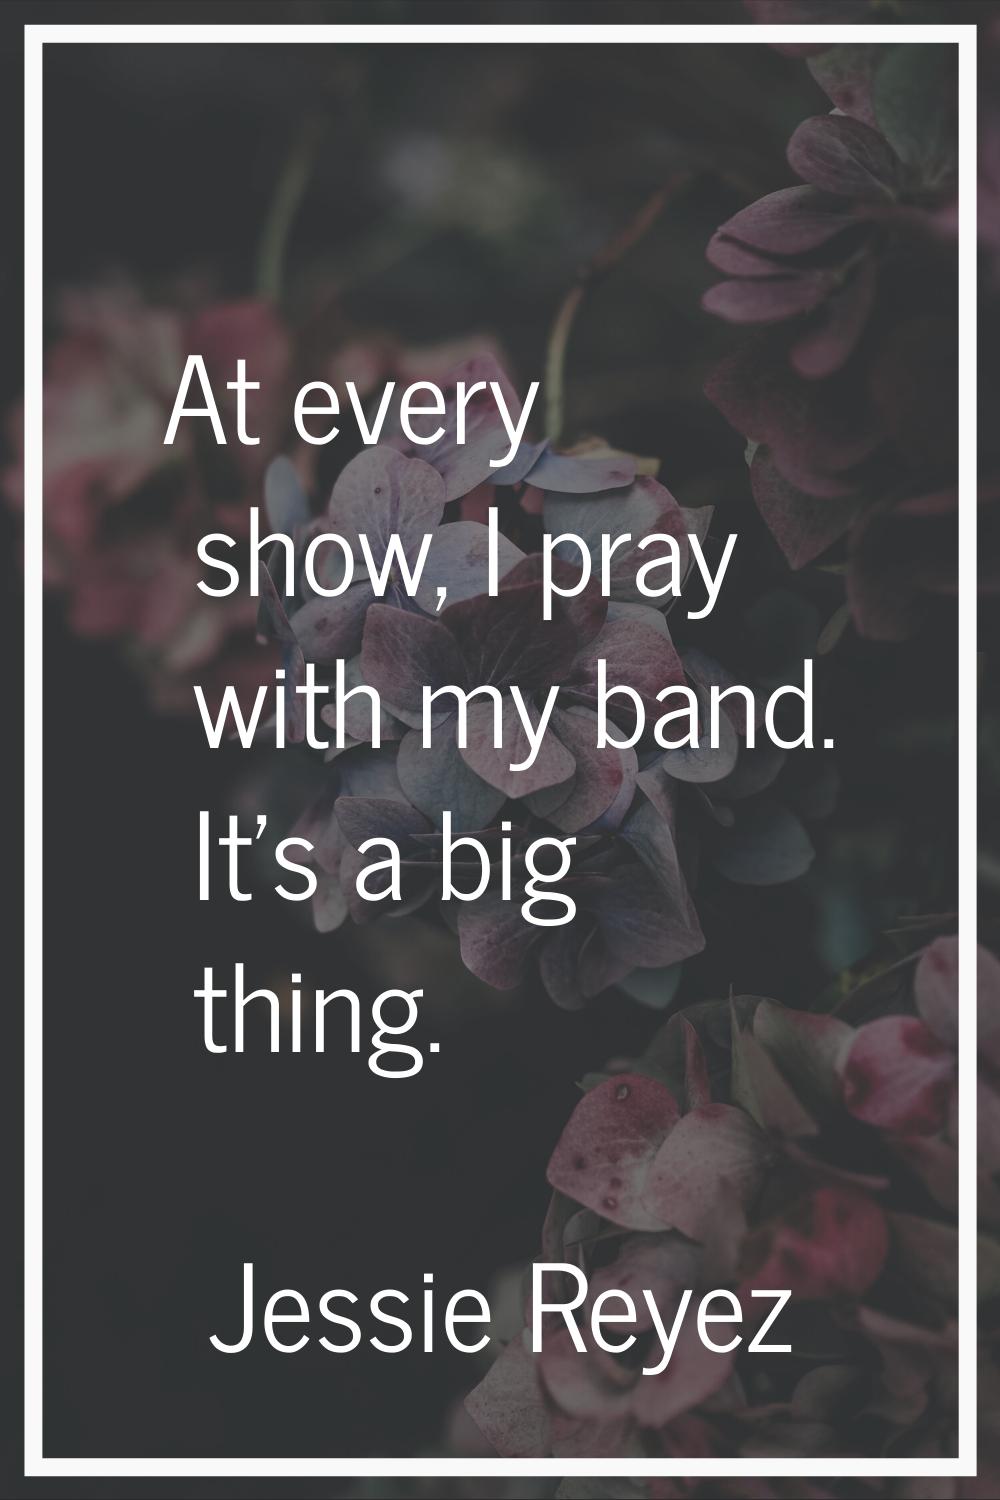 At every show, I pray with my band. It's a big thing.